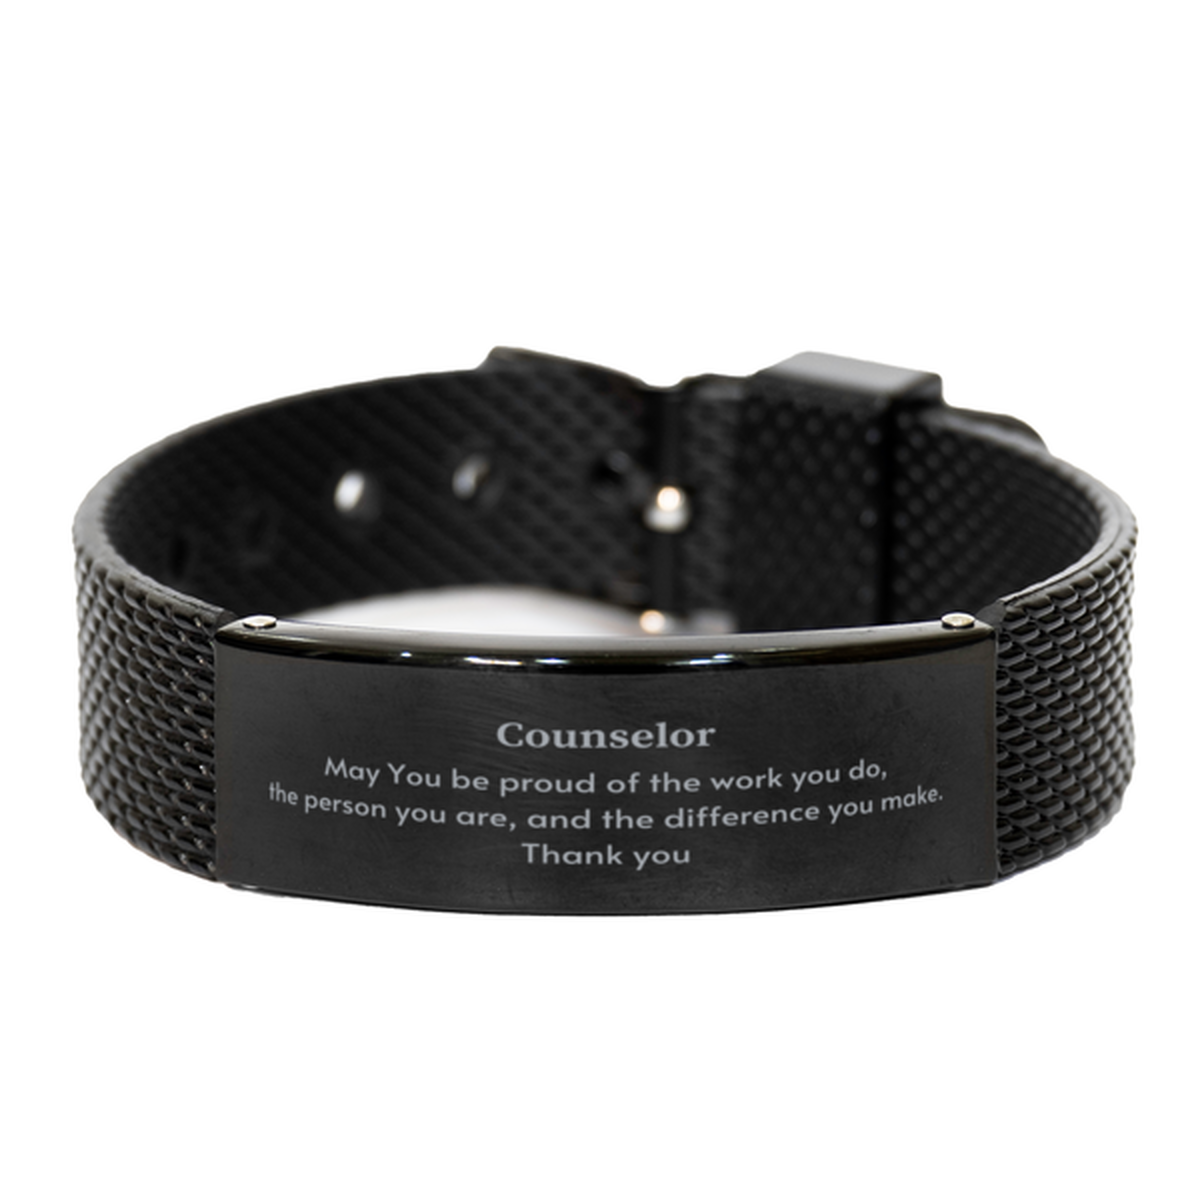 Heartwarming Black Shark Mesh Bracelet Retirement Coworkers Gifts for Counselor, Counselor May You be proud of the work you do, the person you are Gifts for Boss Men Women Friends